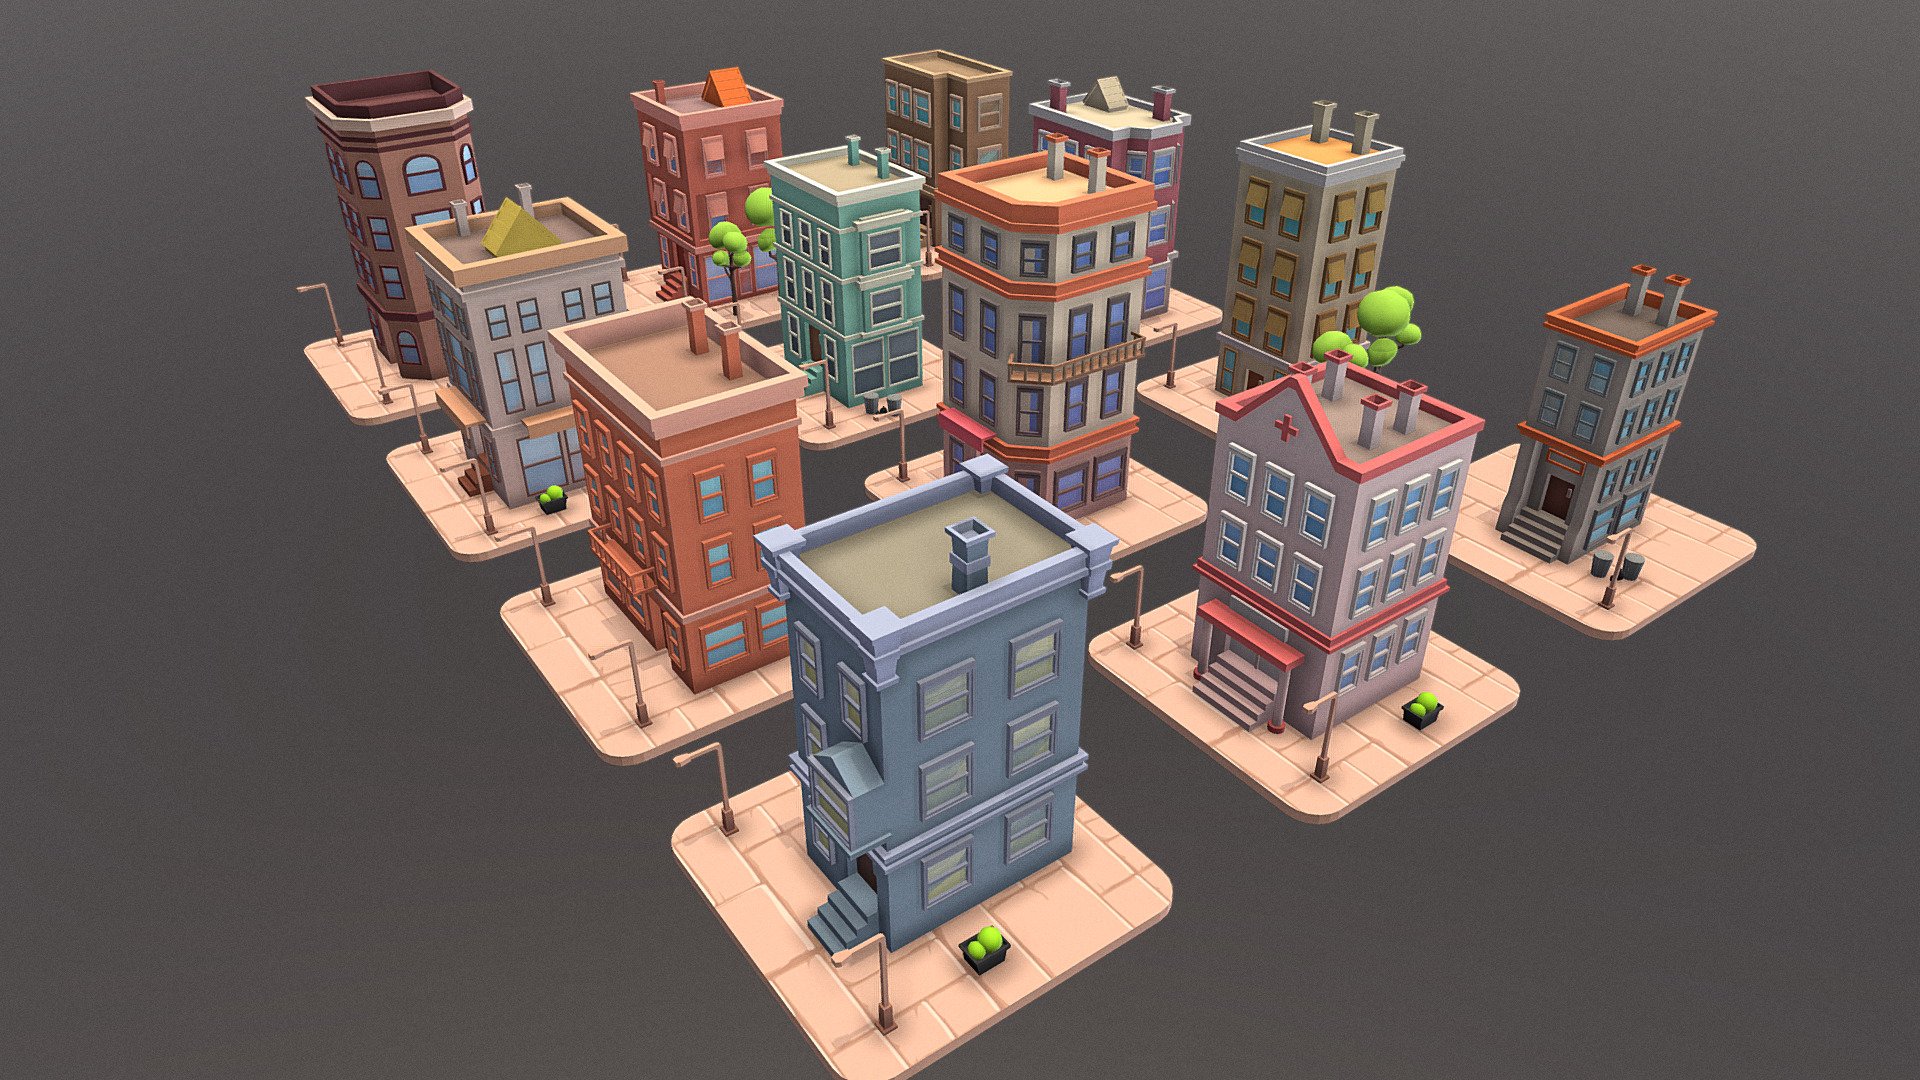 This collection includes 12 different buildings with different and cheerful colors.

In addition to buildings, props such as floors, electric light poles, flowers and pots, trees, and trash cans are also included in this package.

You can use this great collection in all kinds of mobile and computer game projects, as well as in all kinds of animation projects where buildings and urban elements are needed.

Vertices:




Building 01: 1506

Building 02: 1569

Building 03: 2660

Building 04: 1952

Building 05: 1882

Building 06: 1202

Building 07: 2548

Building 08: 2744

Building 09: 2366

Building 10: 2292

Building 11: 2408

Building 12: 2562

Floor: 48

Tree: 462

Trash can: 940

Street light: 52

Flower: 114

Textures:




Size: 1024px × 1024px

Base Color + Ambient Occlusion
 - Cartoon Buildings Set 01 - Buy Royalty Free 3D model by okaro.ir 3d model